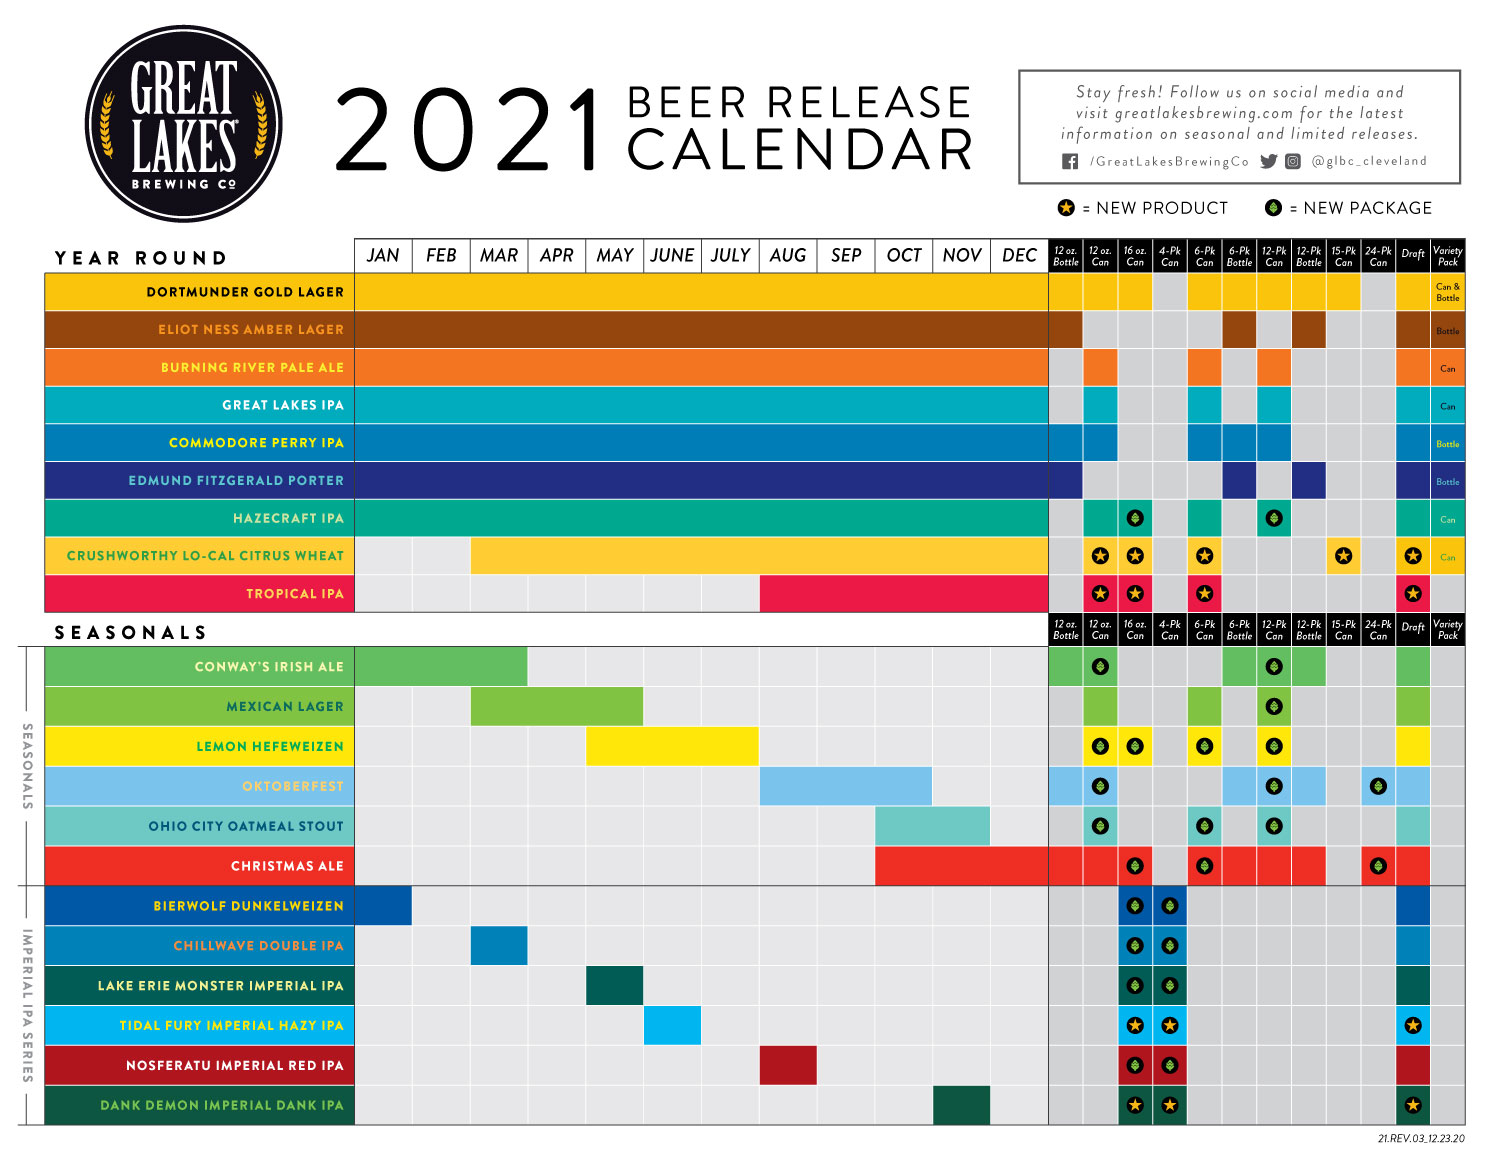 Great Lakes Brewing 2021 Beer Release Calendar via PorchDrinking